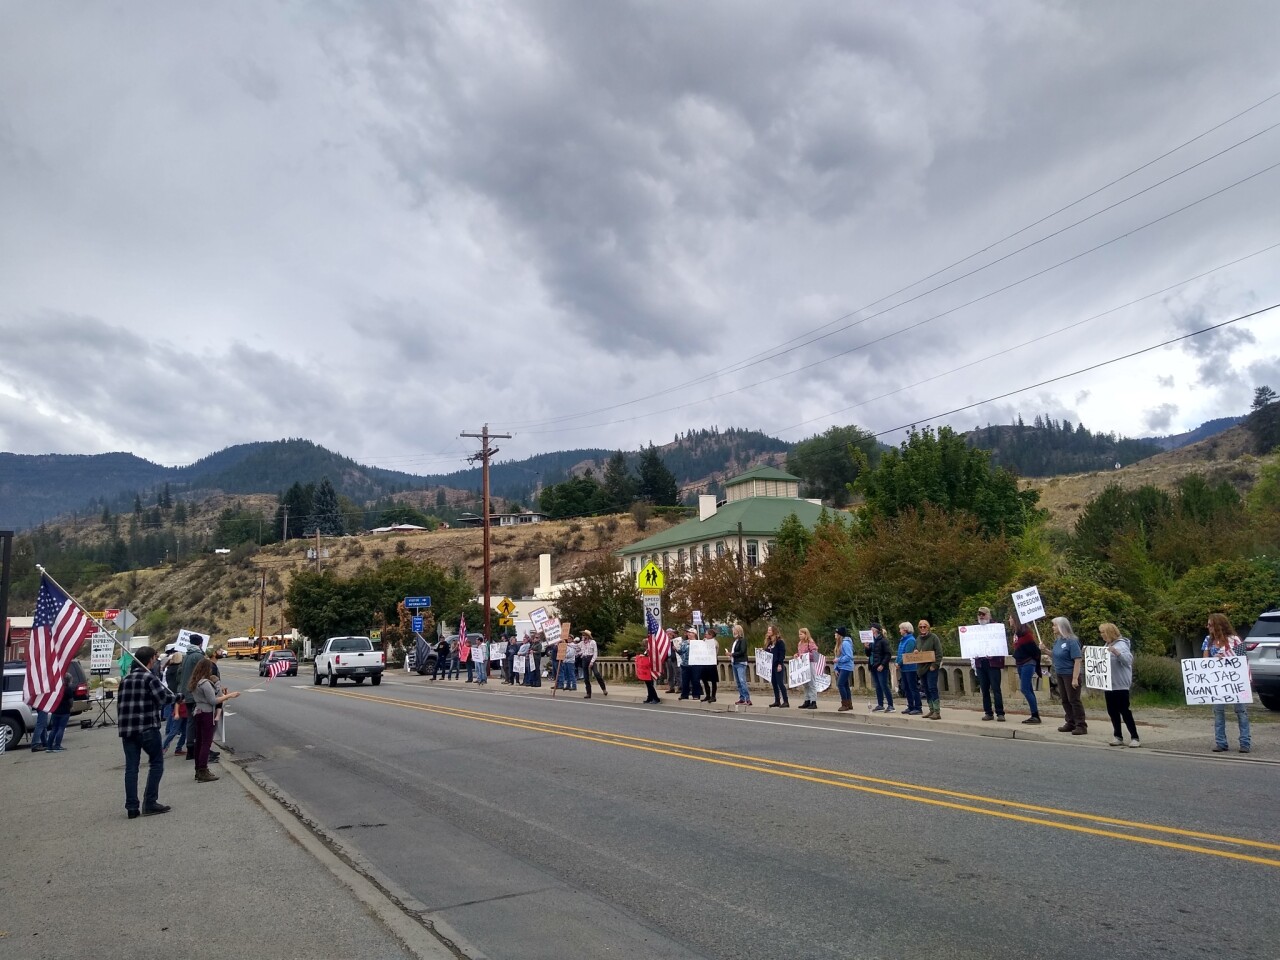 World Wide Rally for Freedom in Twisp, WA. Photo by C. Creighton.